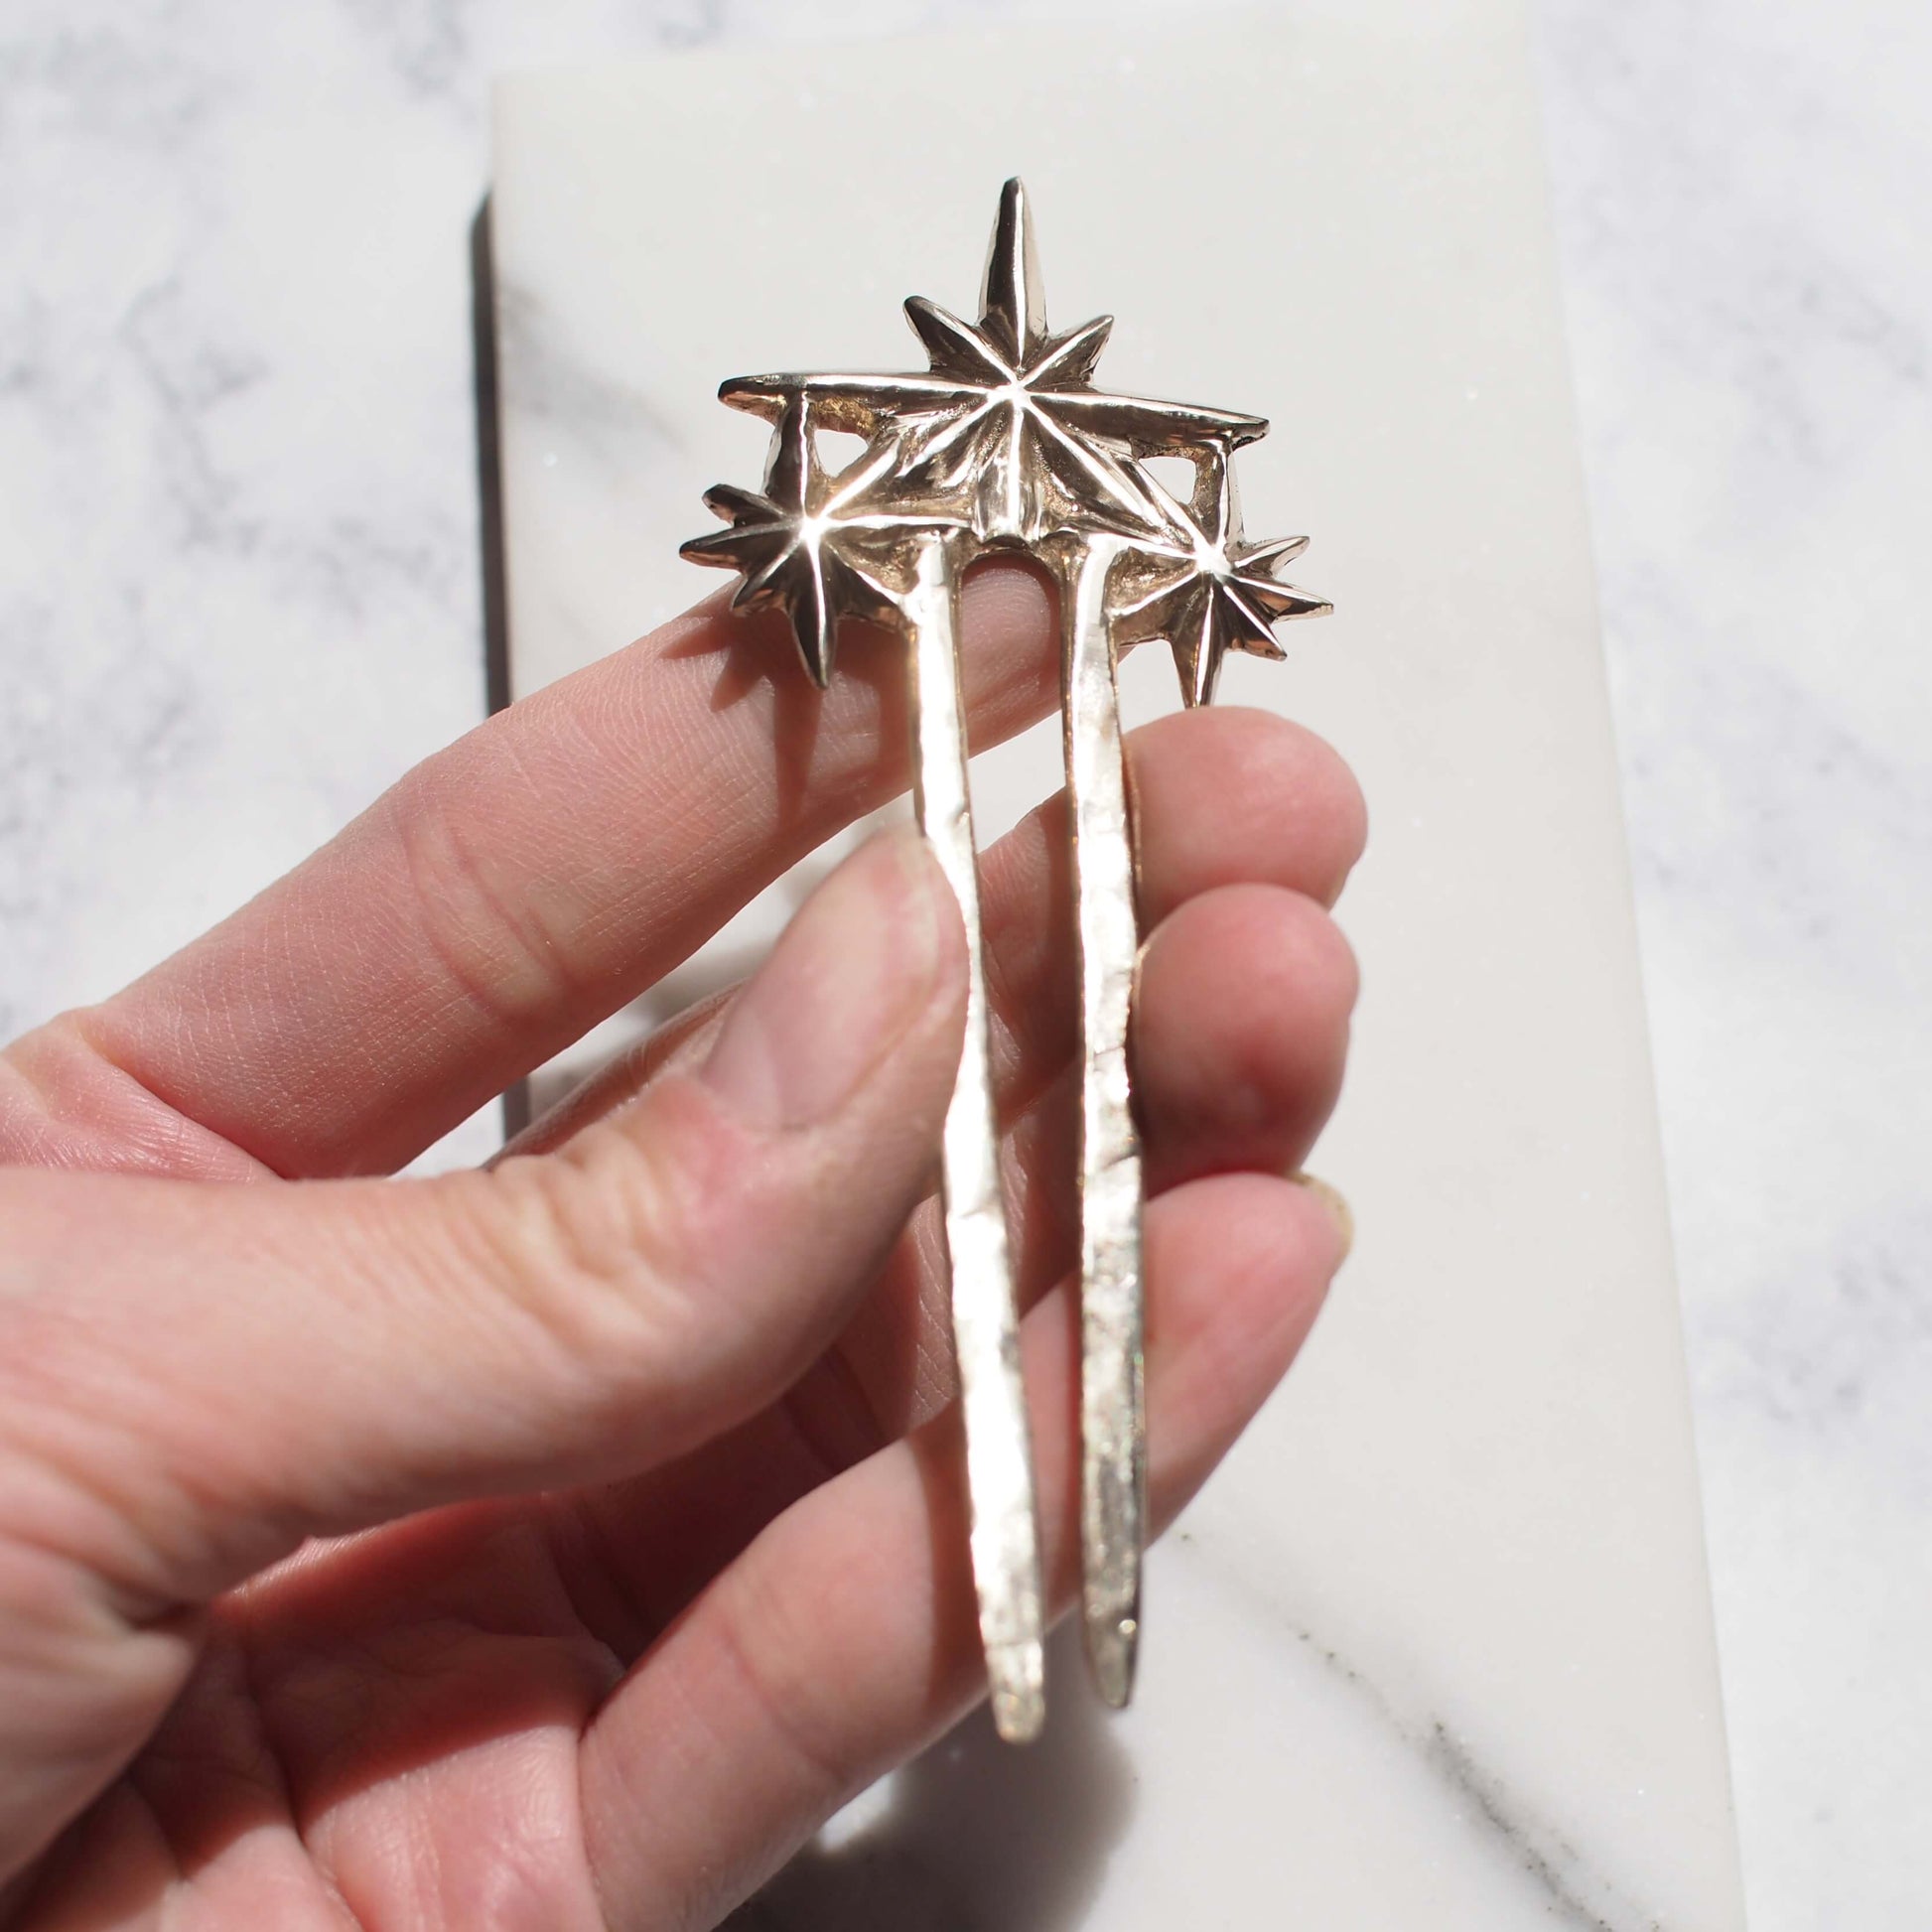 Shiny Constellation Star Hair Pin, cast in gold tone bronze, handmade in the USA by Iron Oxide  Edit alt text